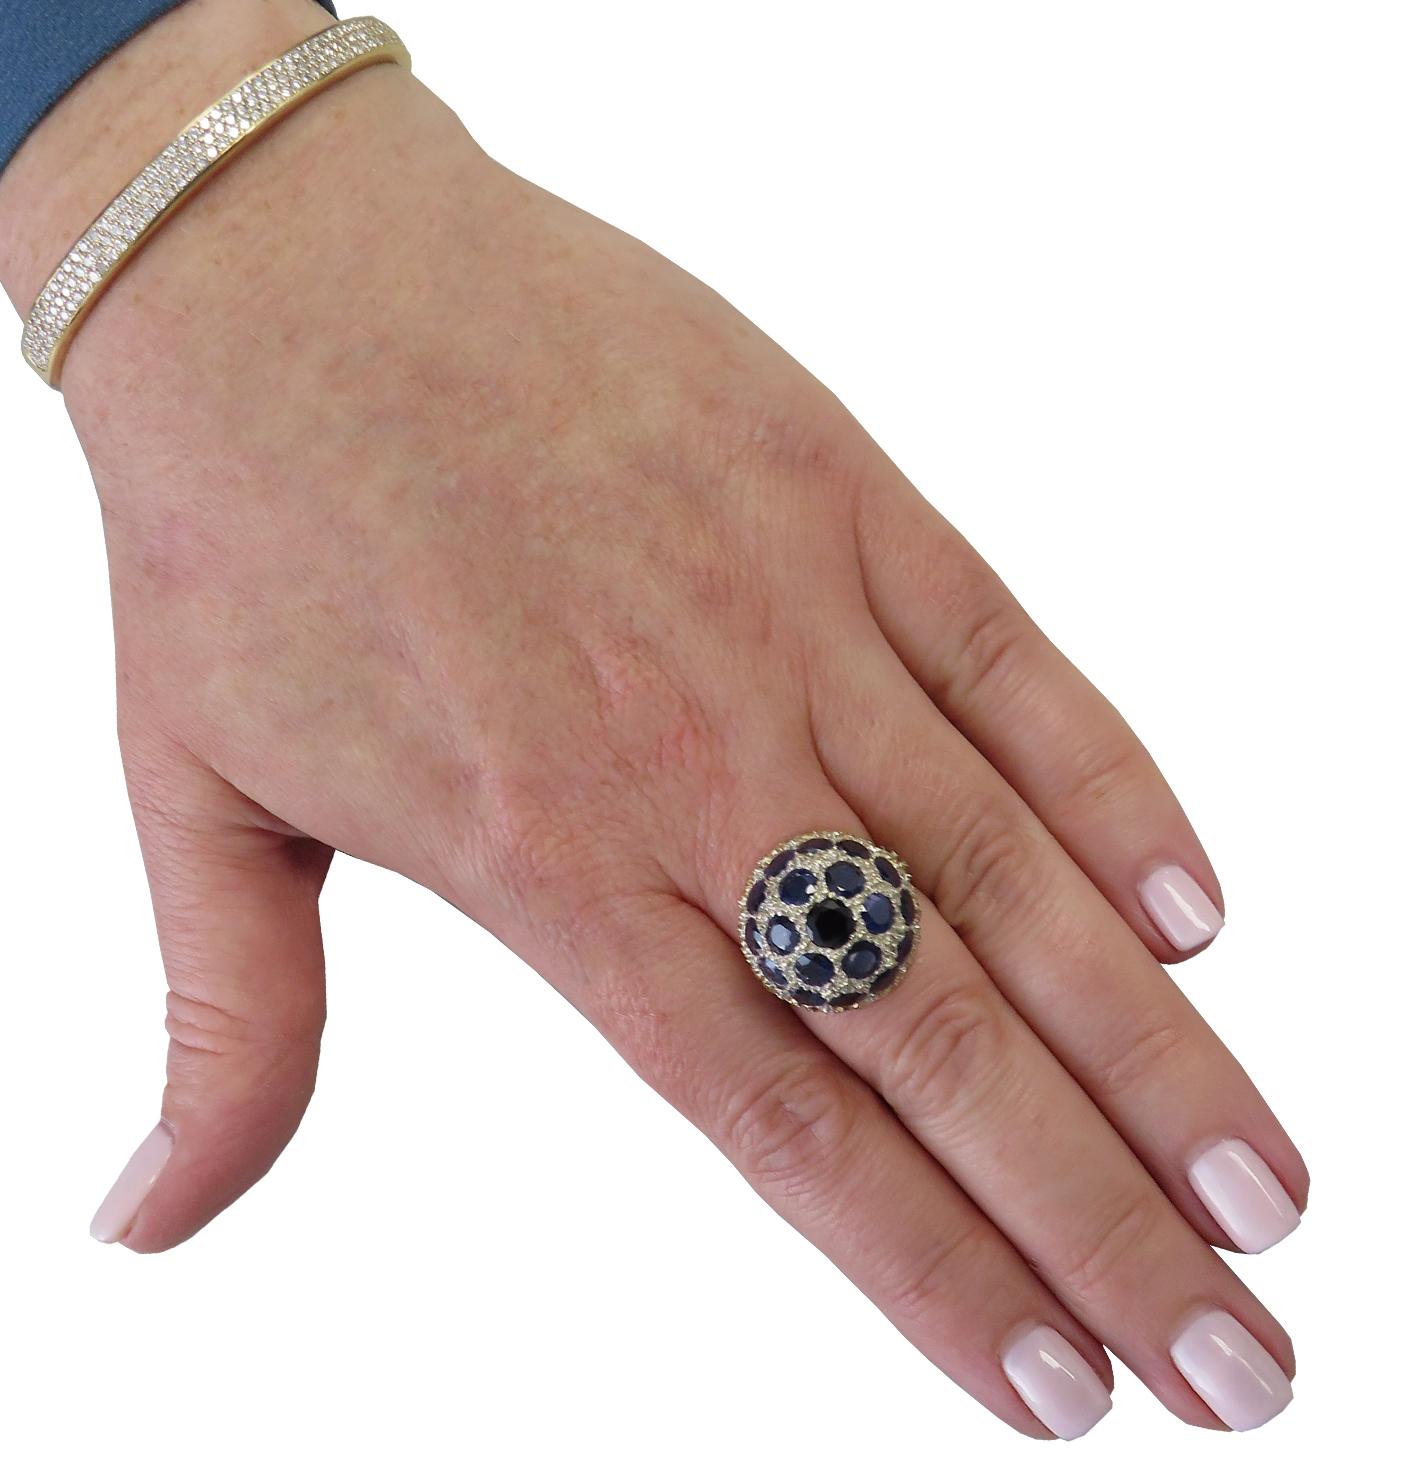 Vintage Mario Buccellati bombe ring circa 1950, featuring 19 round blue sapphires weighing approximately 8.5 carats total. This ornate domed ring measures 19 mm in diameter and 11.7 in height. The band measures 2mm, tapering gently to 1.45 mm. It is